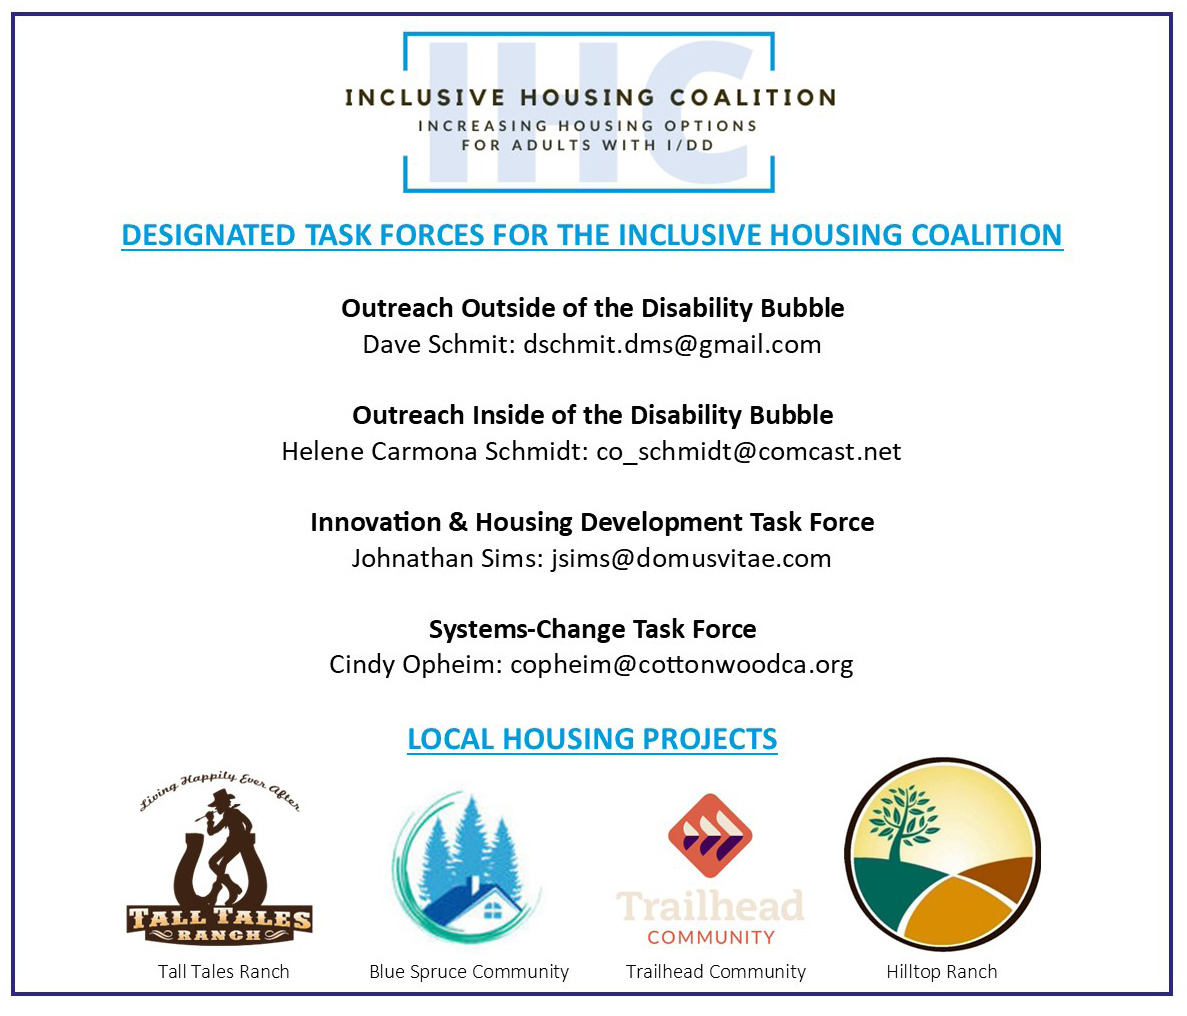 Designated Task Forces for Inclusive Housing Coalition